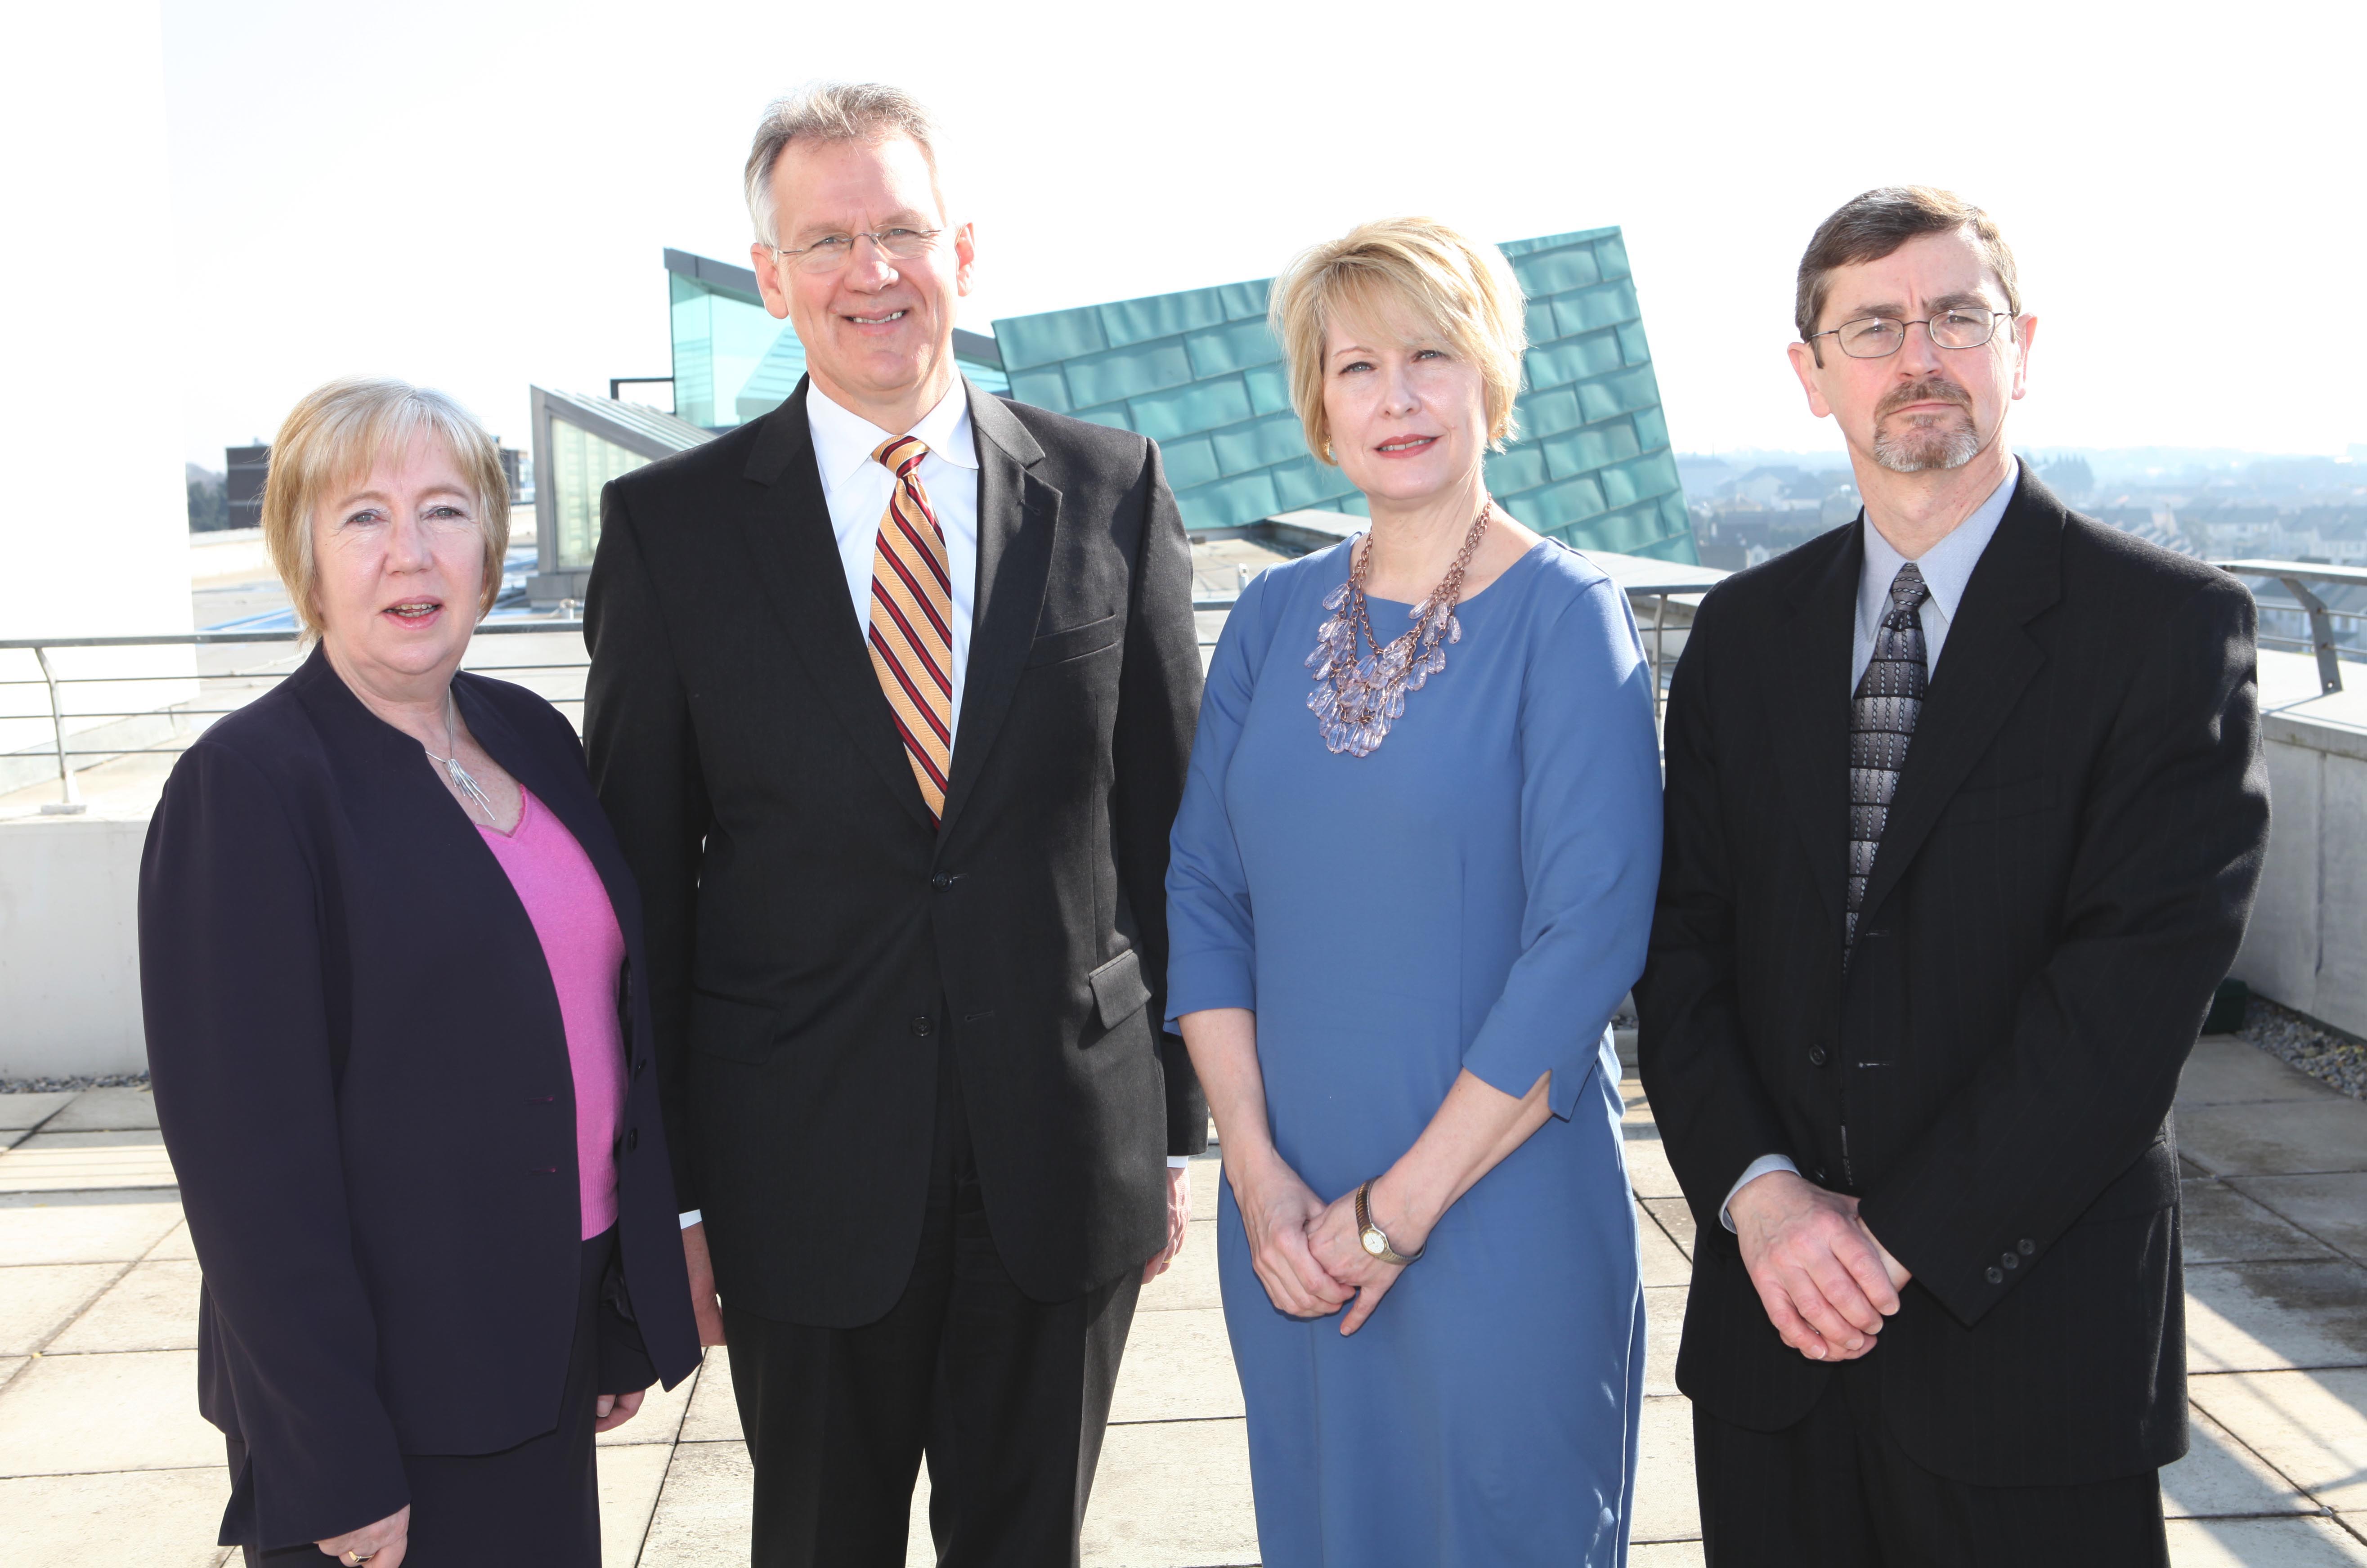 Pictured left to right are Marion Coy, president of the Galway–Mayo Institute of Technology; Paul Winistorfer, dean of the Virginia Tech College of Natural Resources; Betty Adams, executive director of the Southern Virginia Higher Education Center; Robert Bush, professor in Virginia Tech's Department of Wood Science and Forest Products.